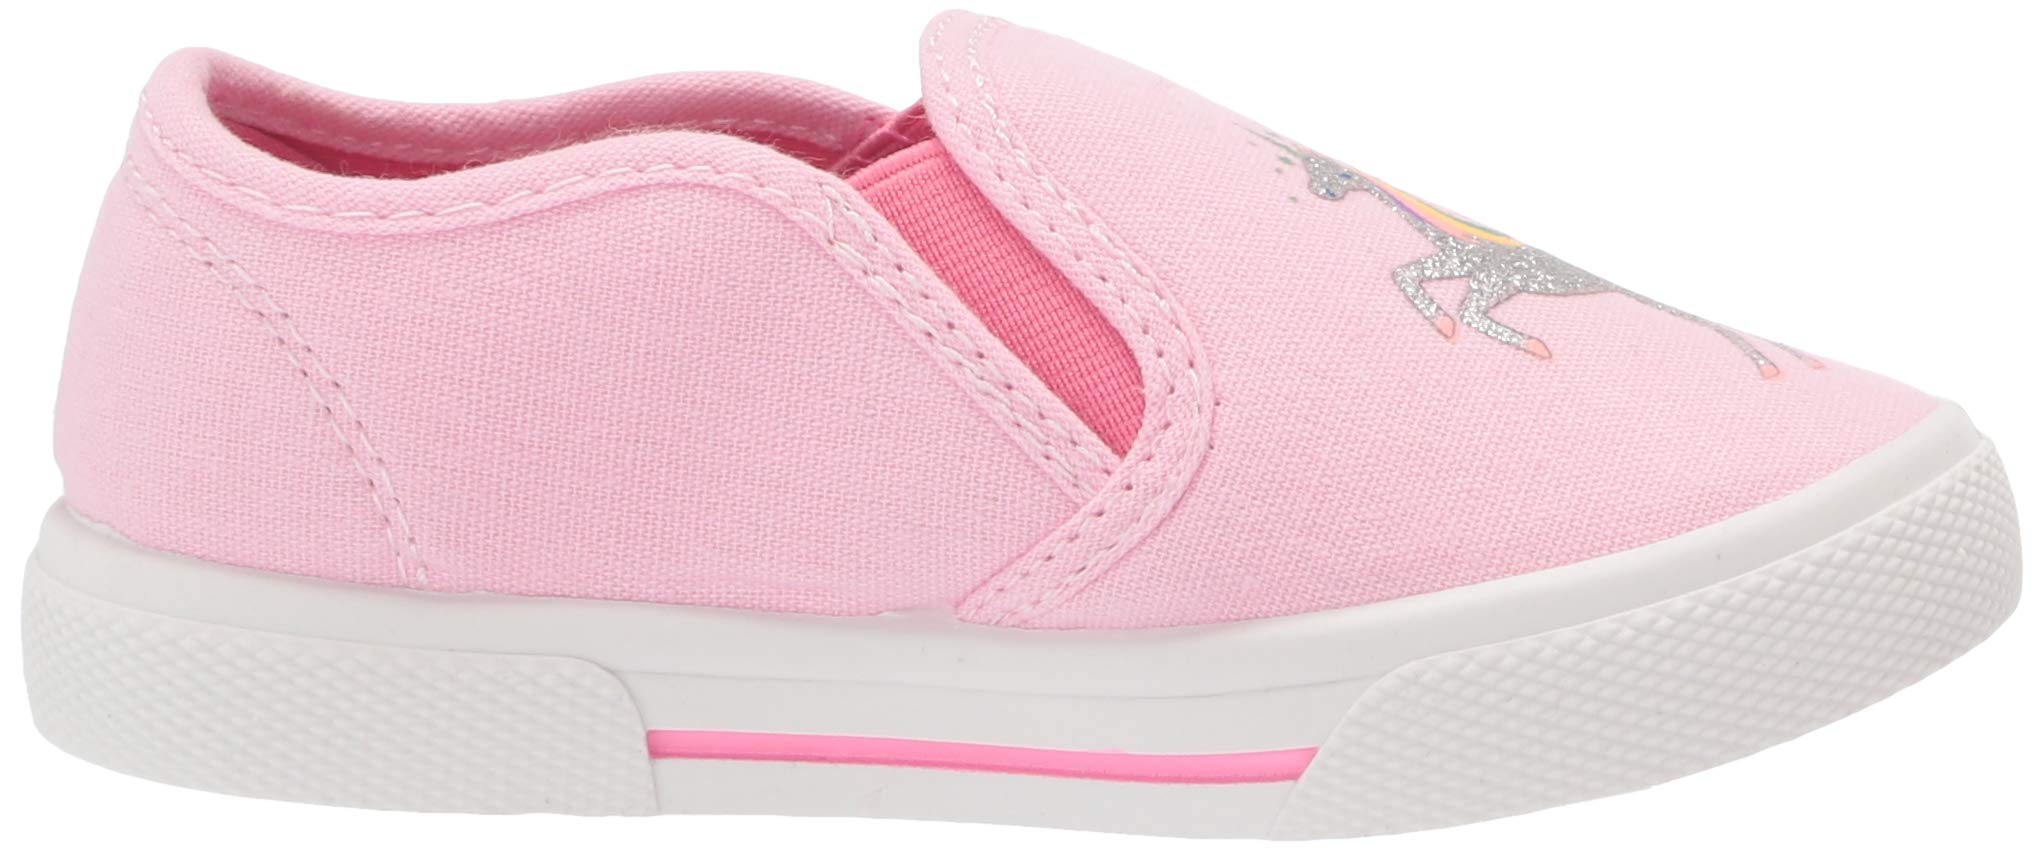 Simple Joys by Carter's Unisex Kids and Toddlers' Casual Slip-on Canvas Shoe